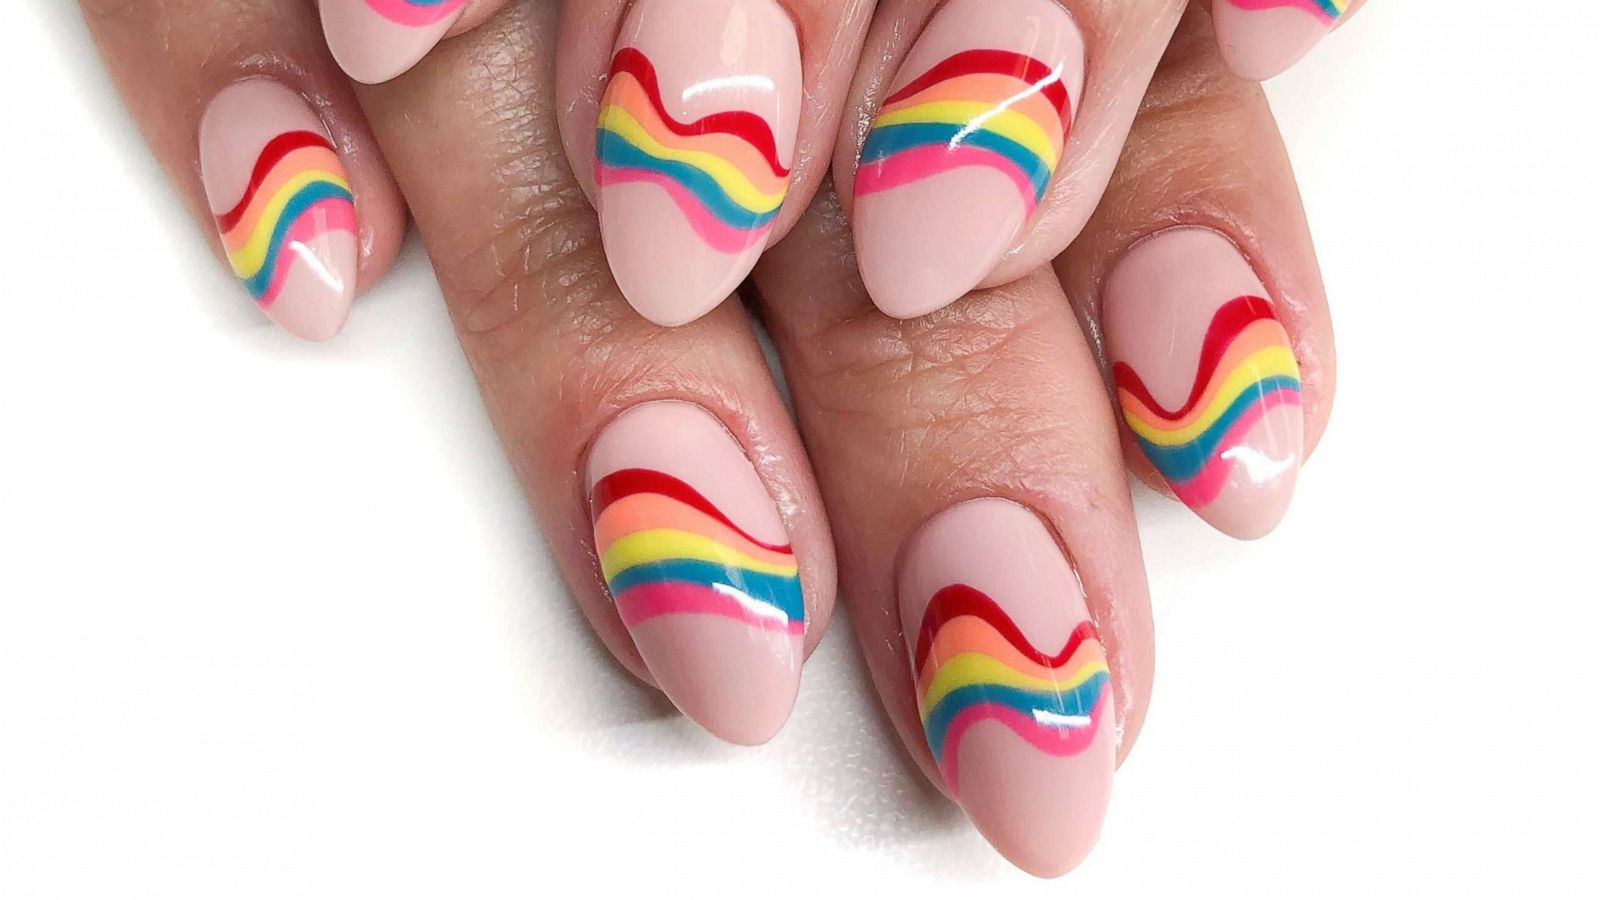 13 rainbow nail art ideas to try during Pride month and beyond - Good  Morning America